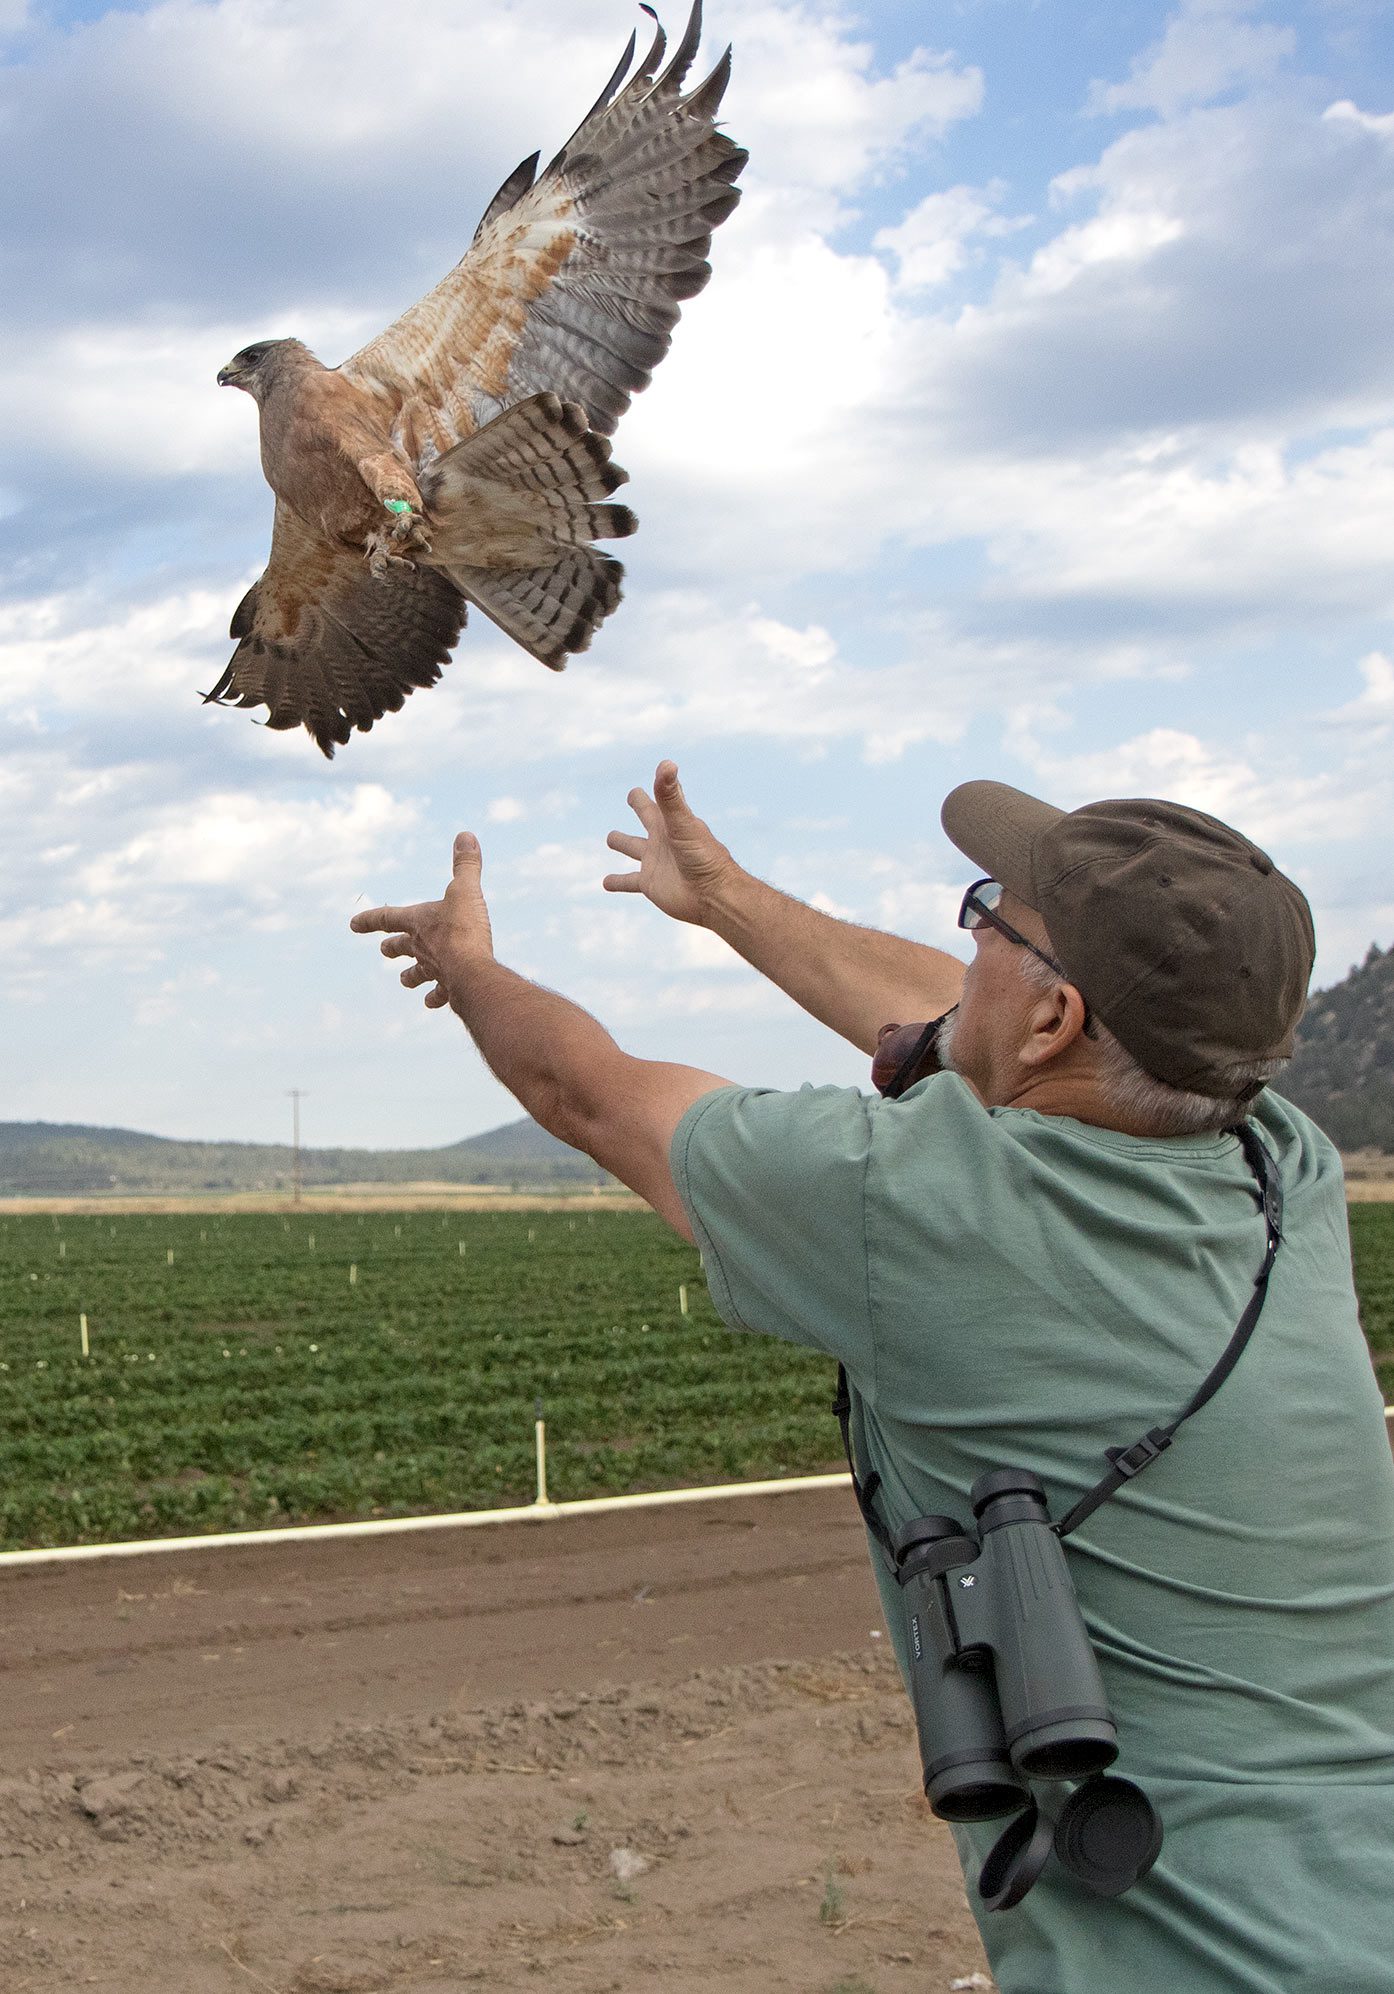 Biologist Brian Woodbridge releases a hawk after collecting measurements and blood samples. Photo by Scott Weidensaul.